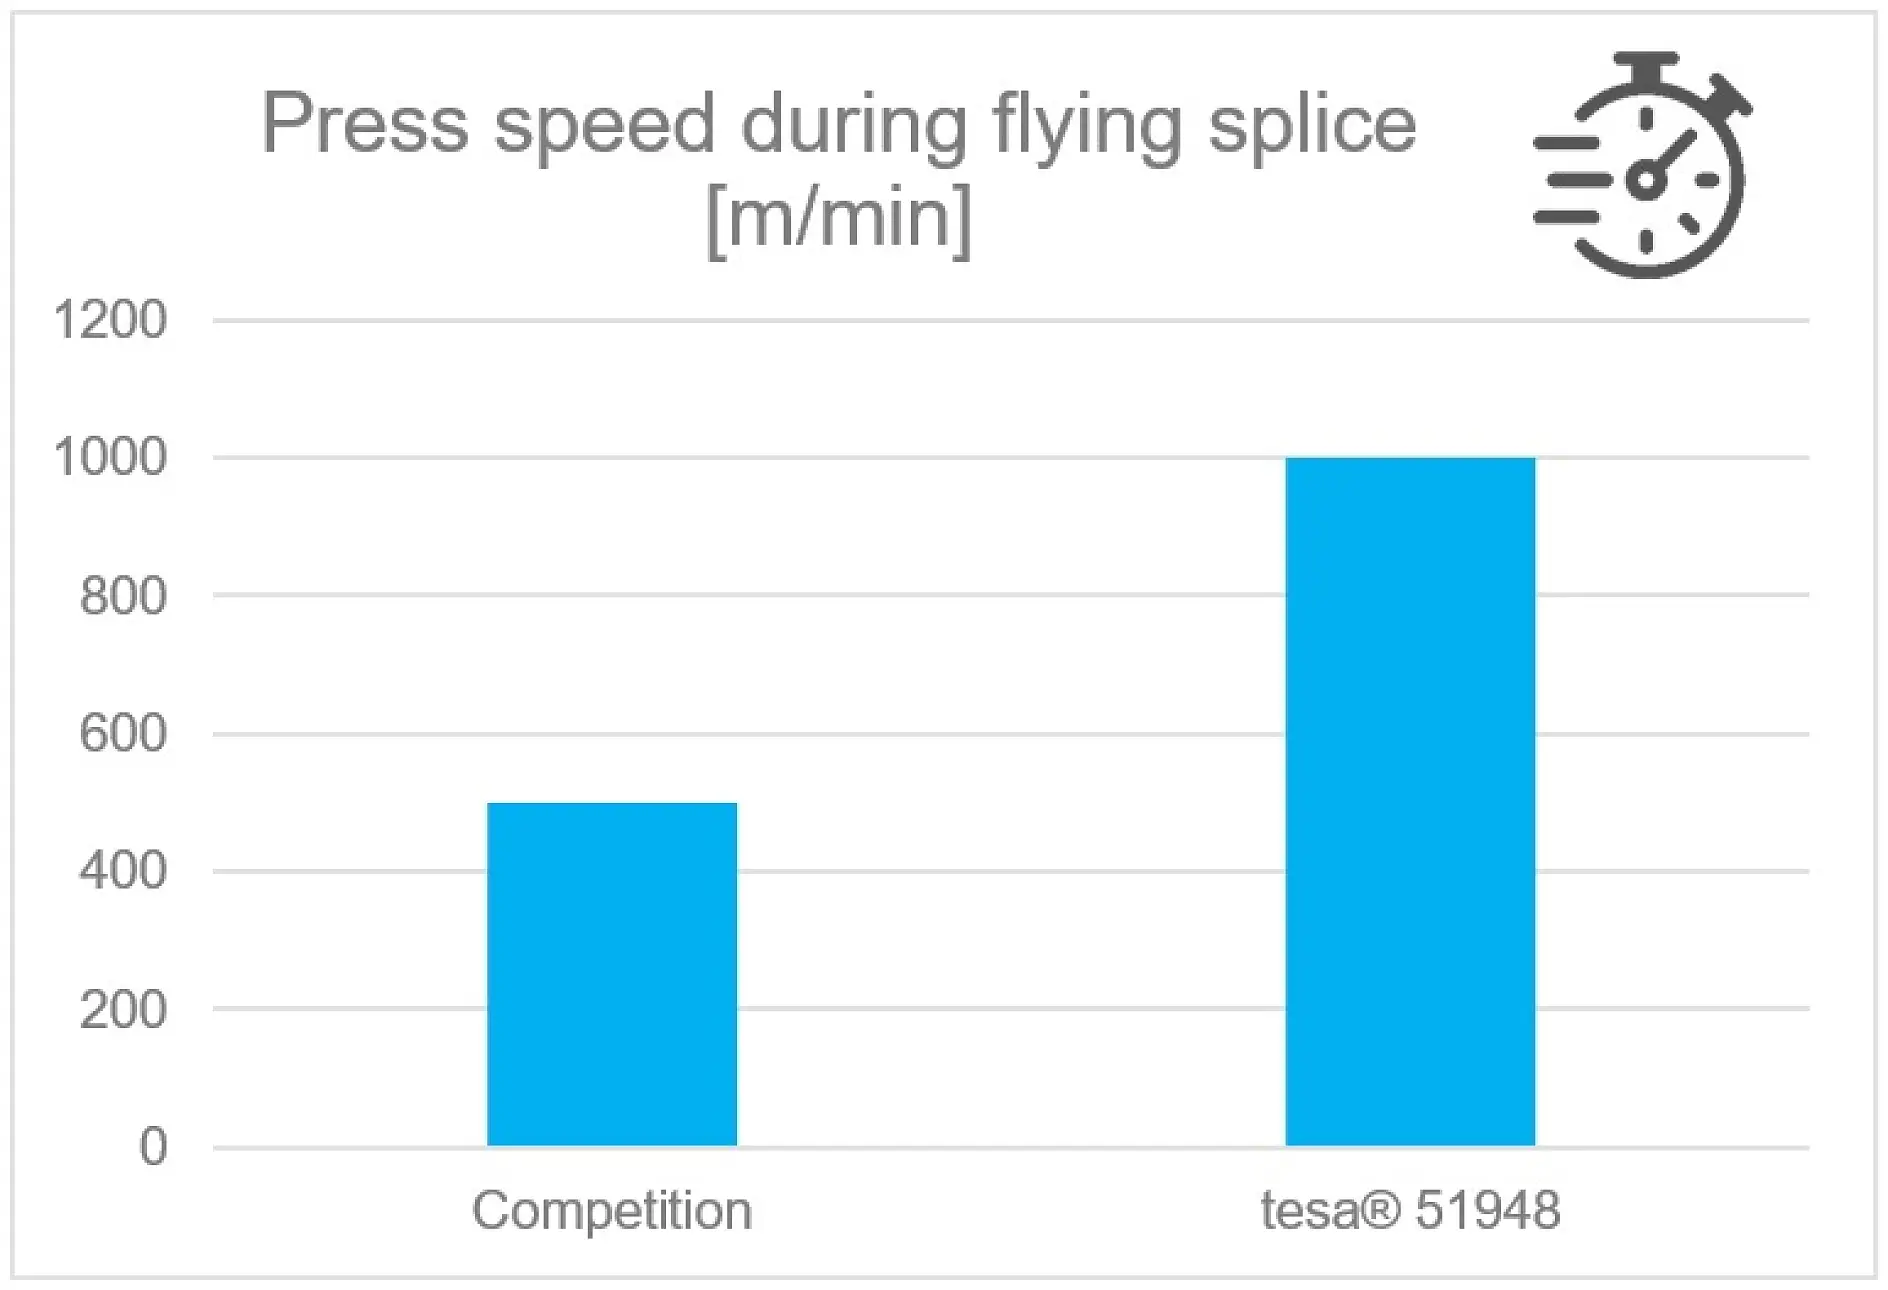 data shows that flexographic printing machine runs two times faster during flying splice after using tesa 51948 EasySplice FilmLine Black X